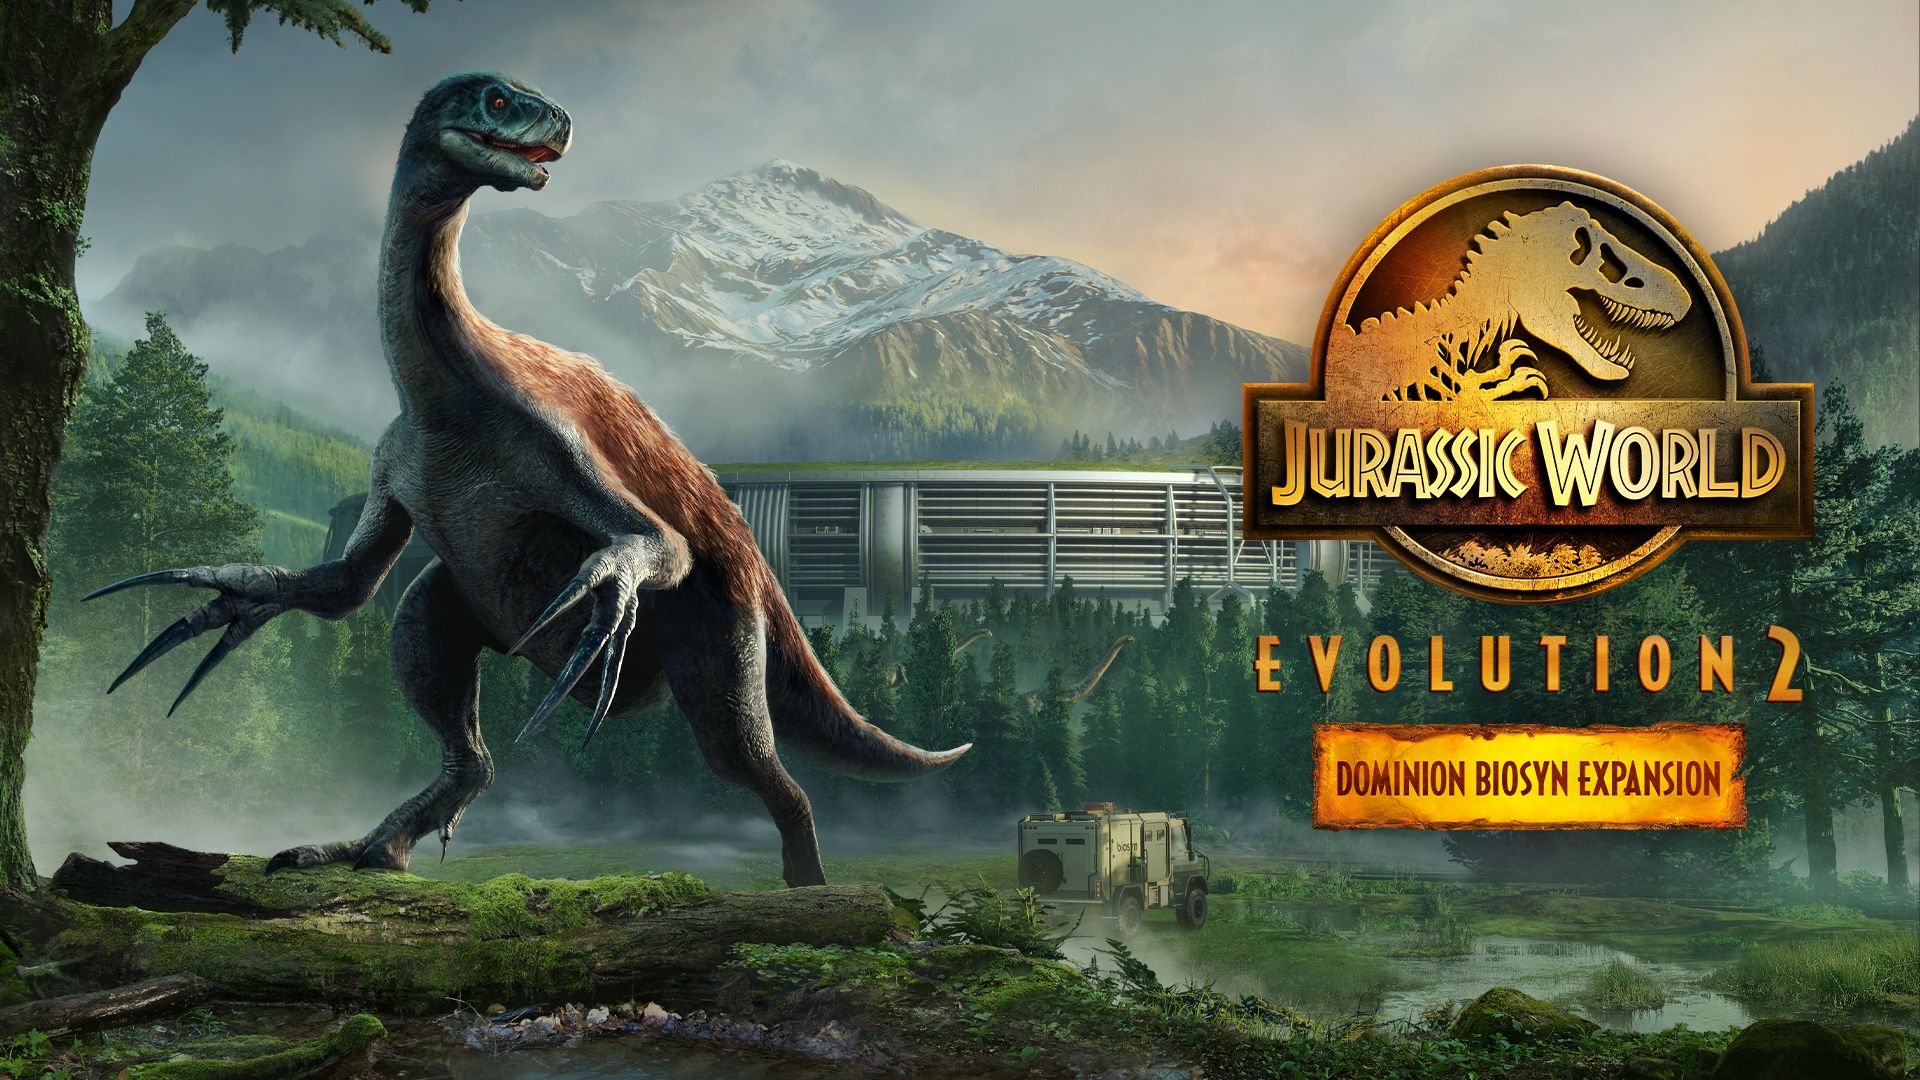 Jurassic World Evolution 2: Dominion Biosyn Expansion Available Now